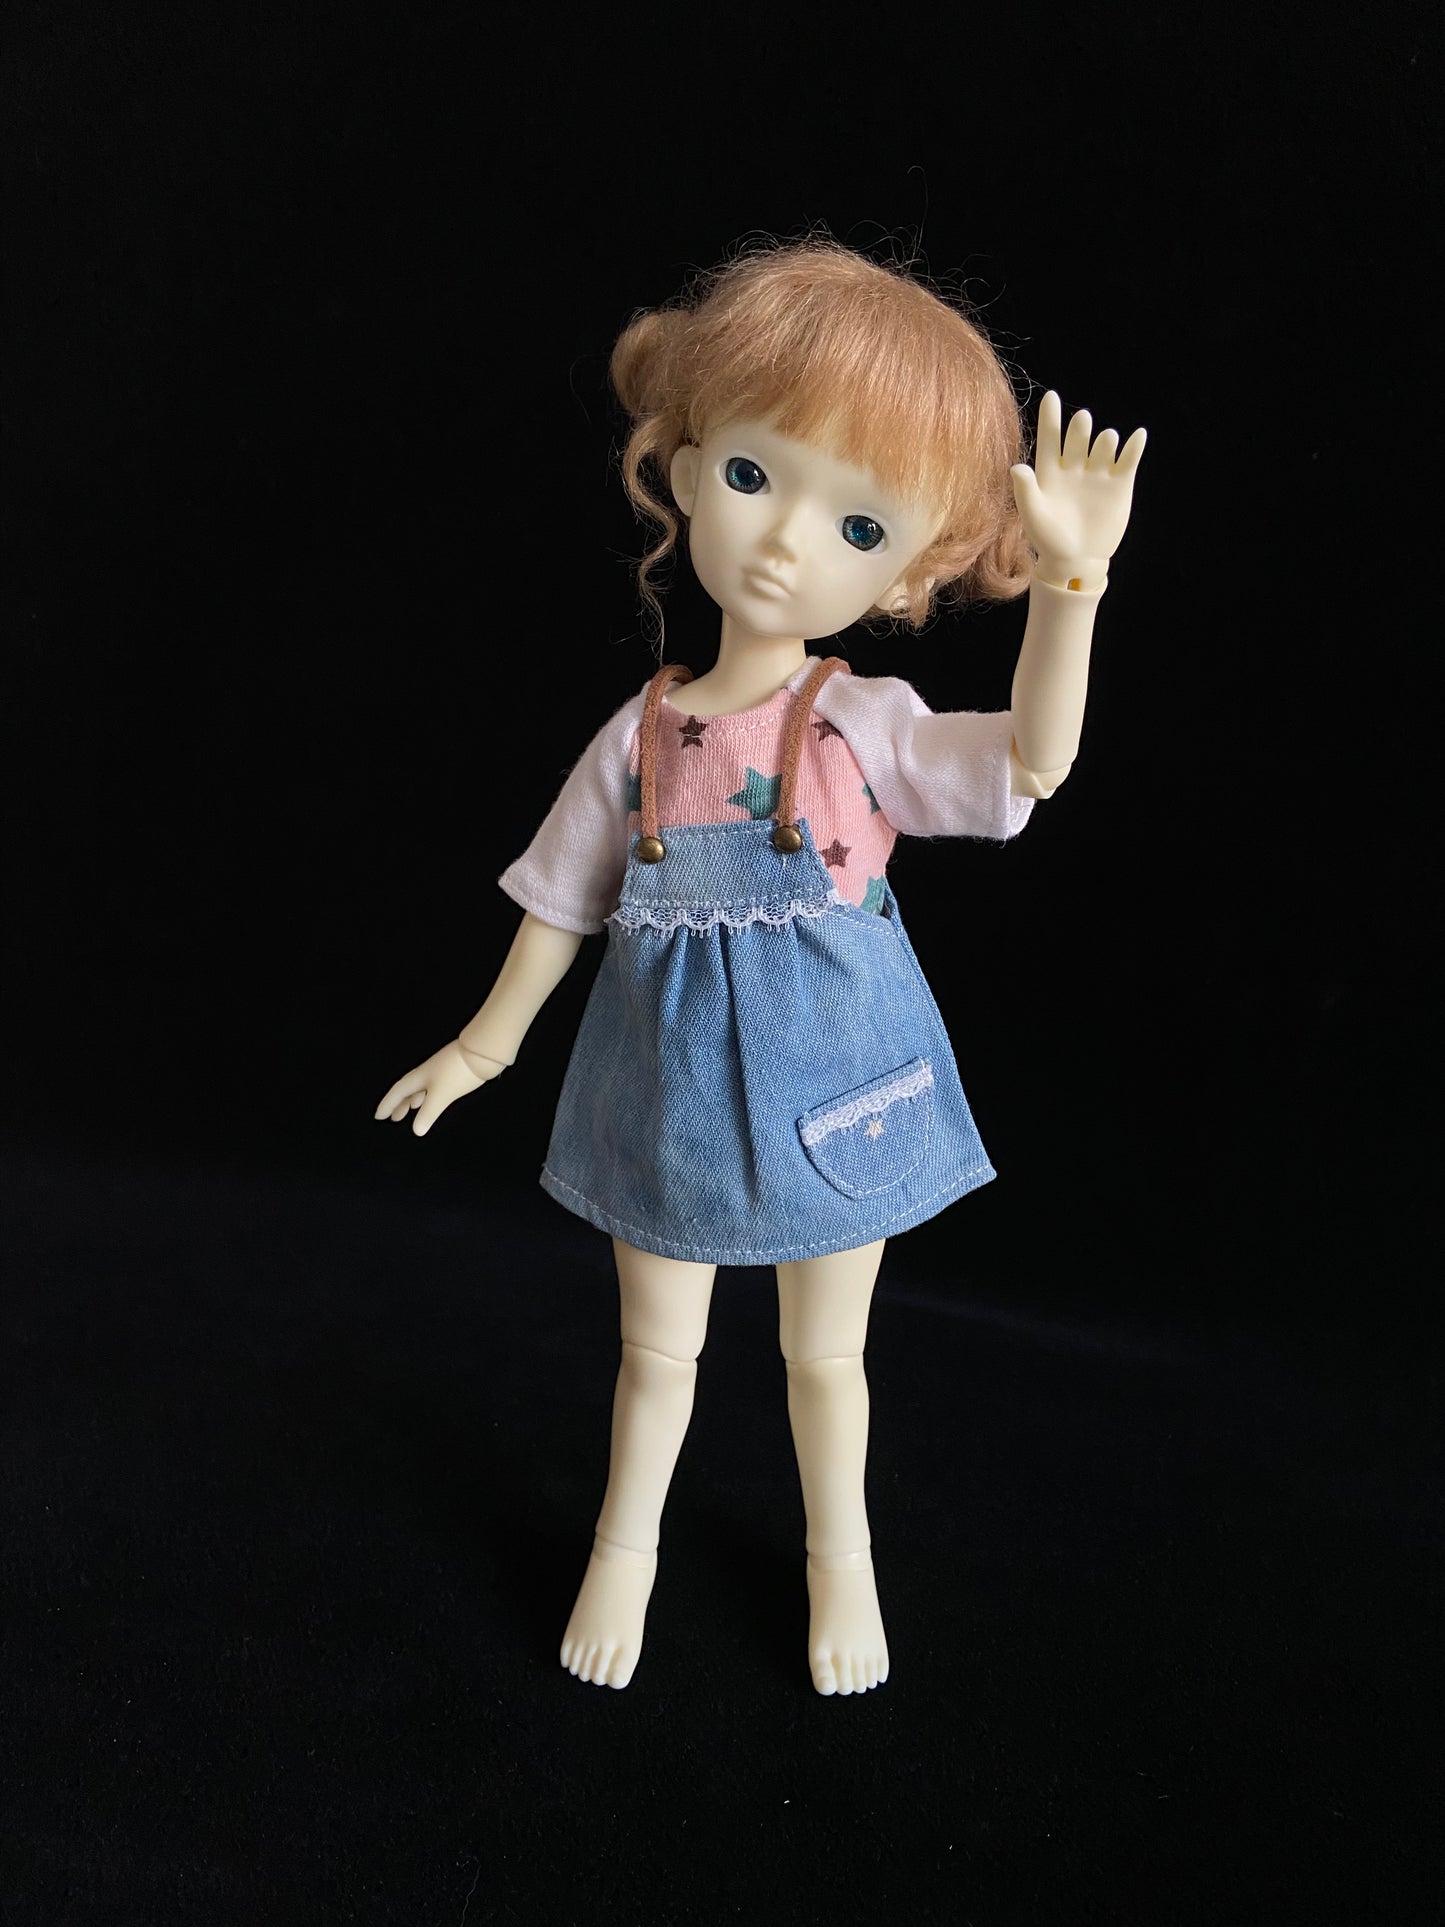 1/6 girl doll Tong Tong with shown items